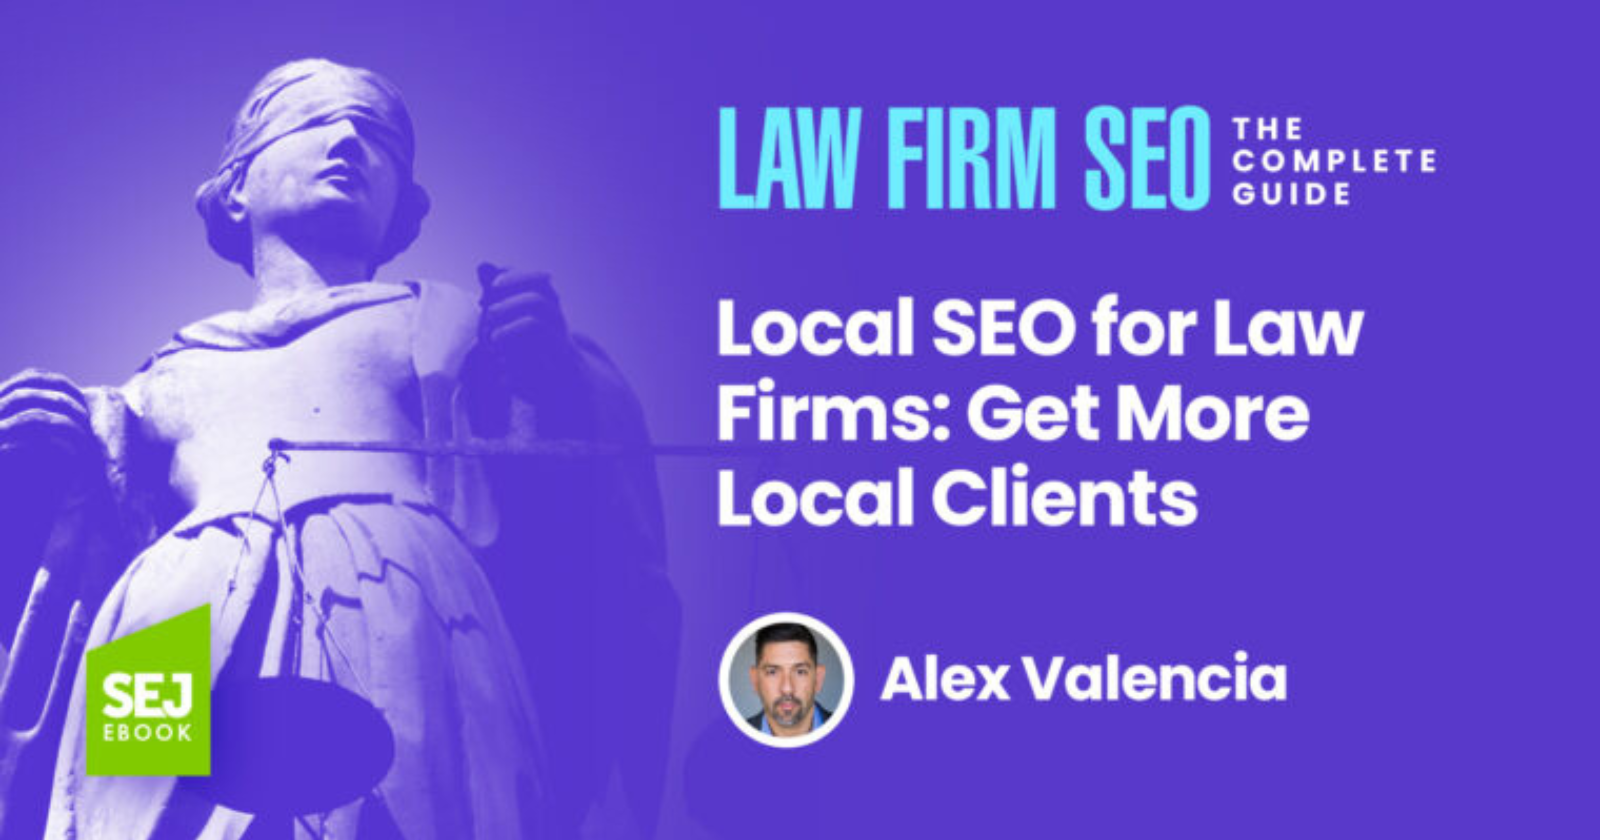 local-seo-for-law-firms-62fdbea5df0a0-sej.png